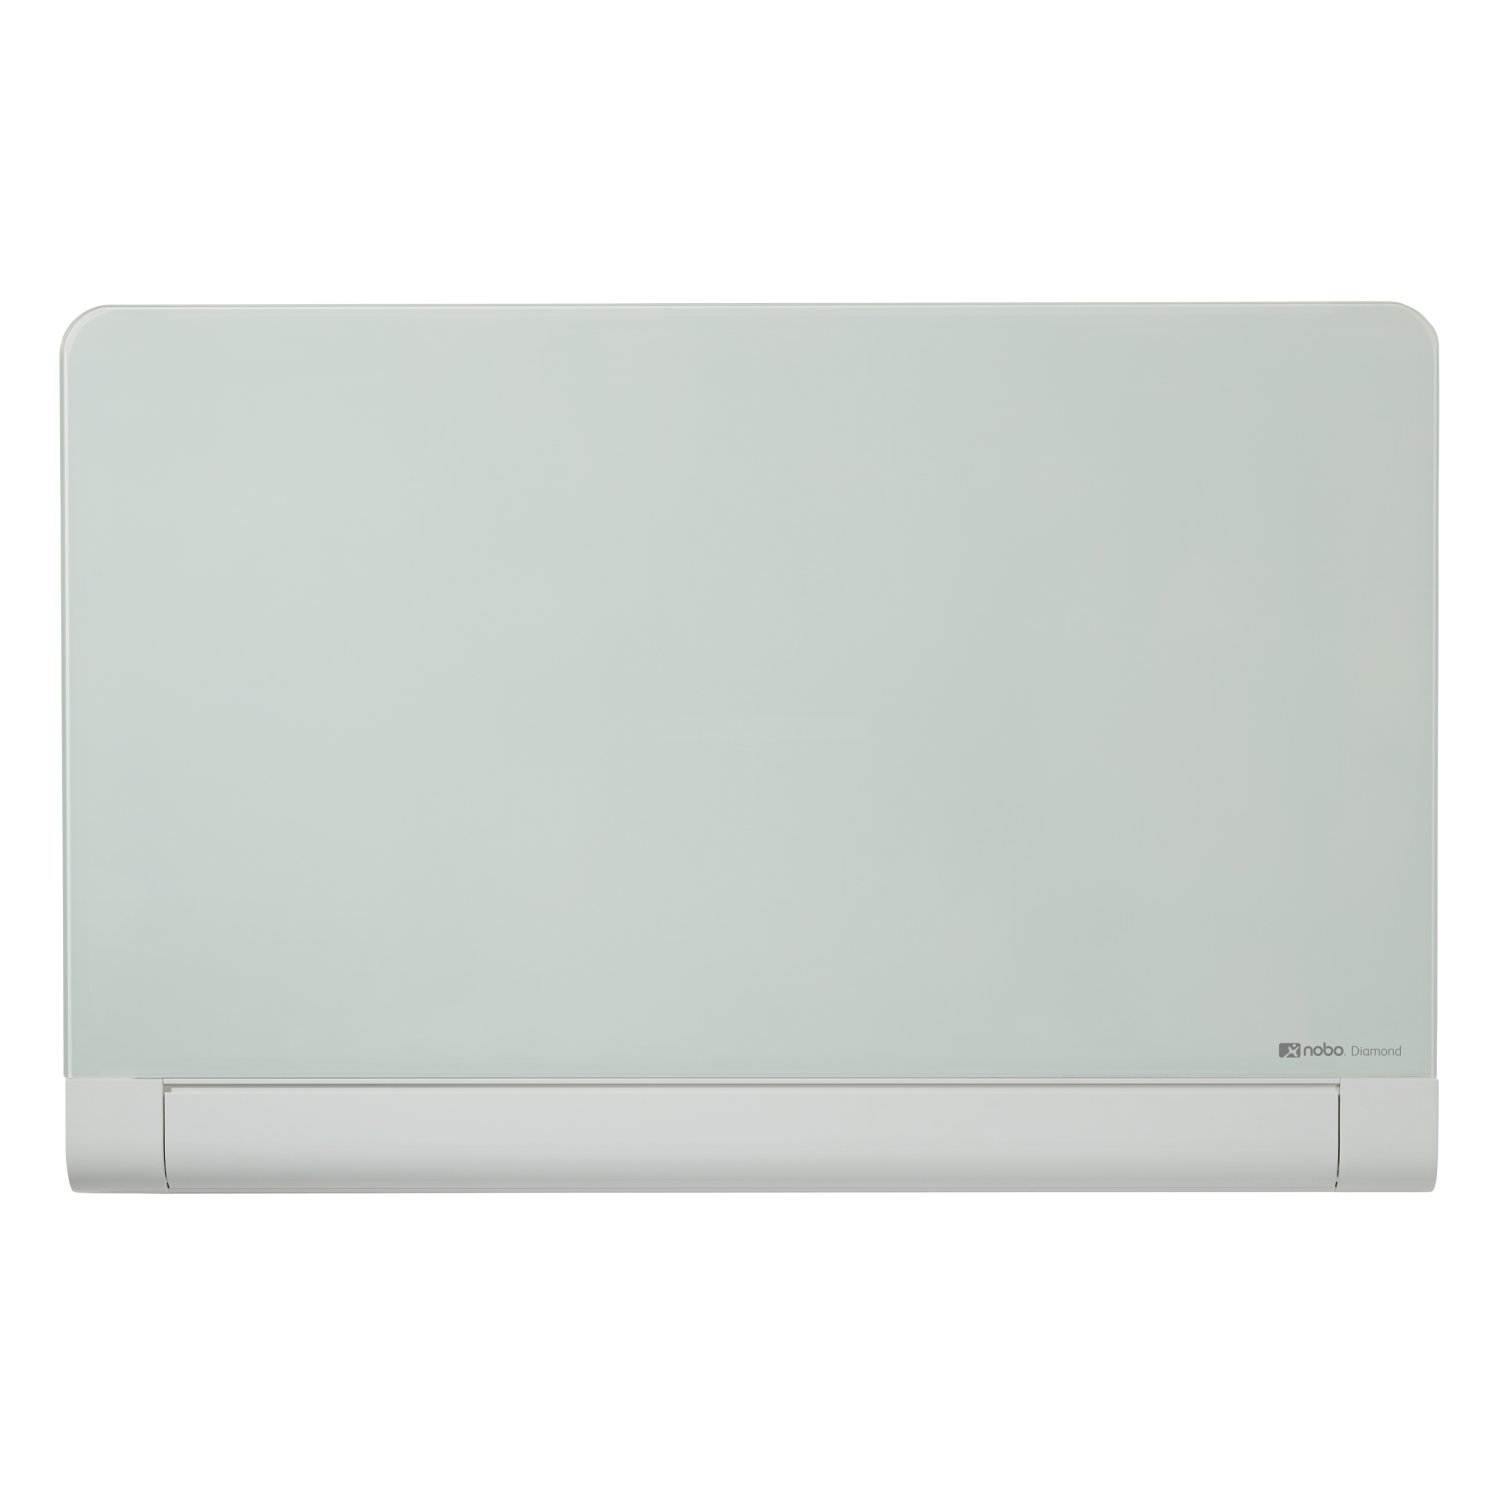 Photos - Dry Erase Board / Flipchart Nobo Diamond Glass Board with Rounded Corners Magnetic White 1264x711m 190 